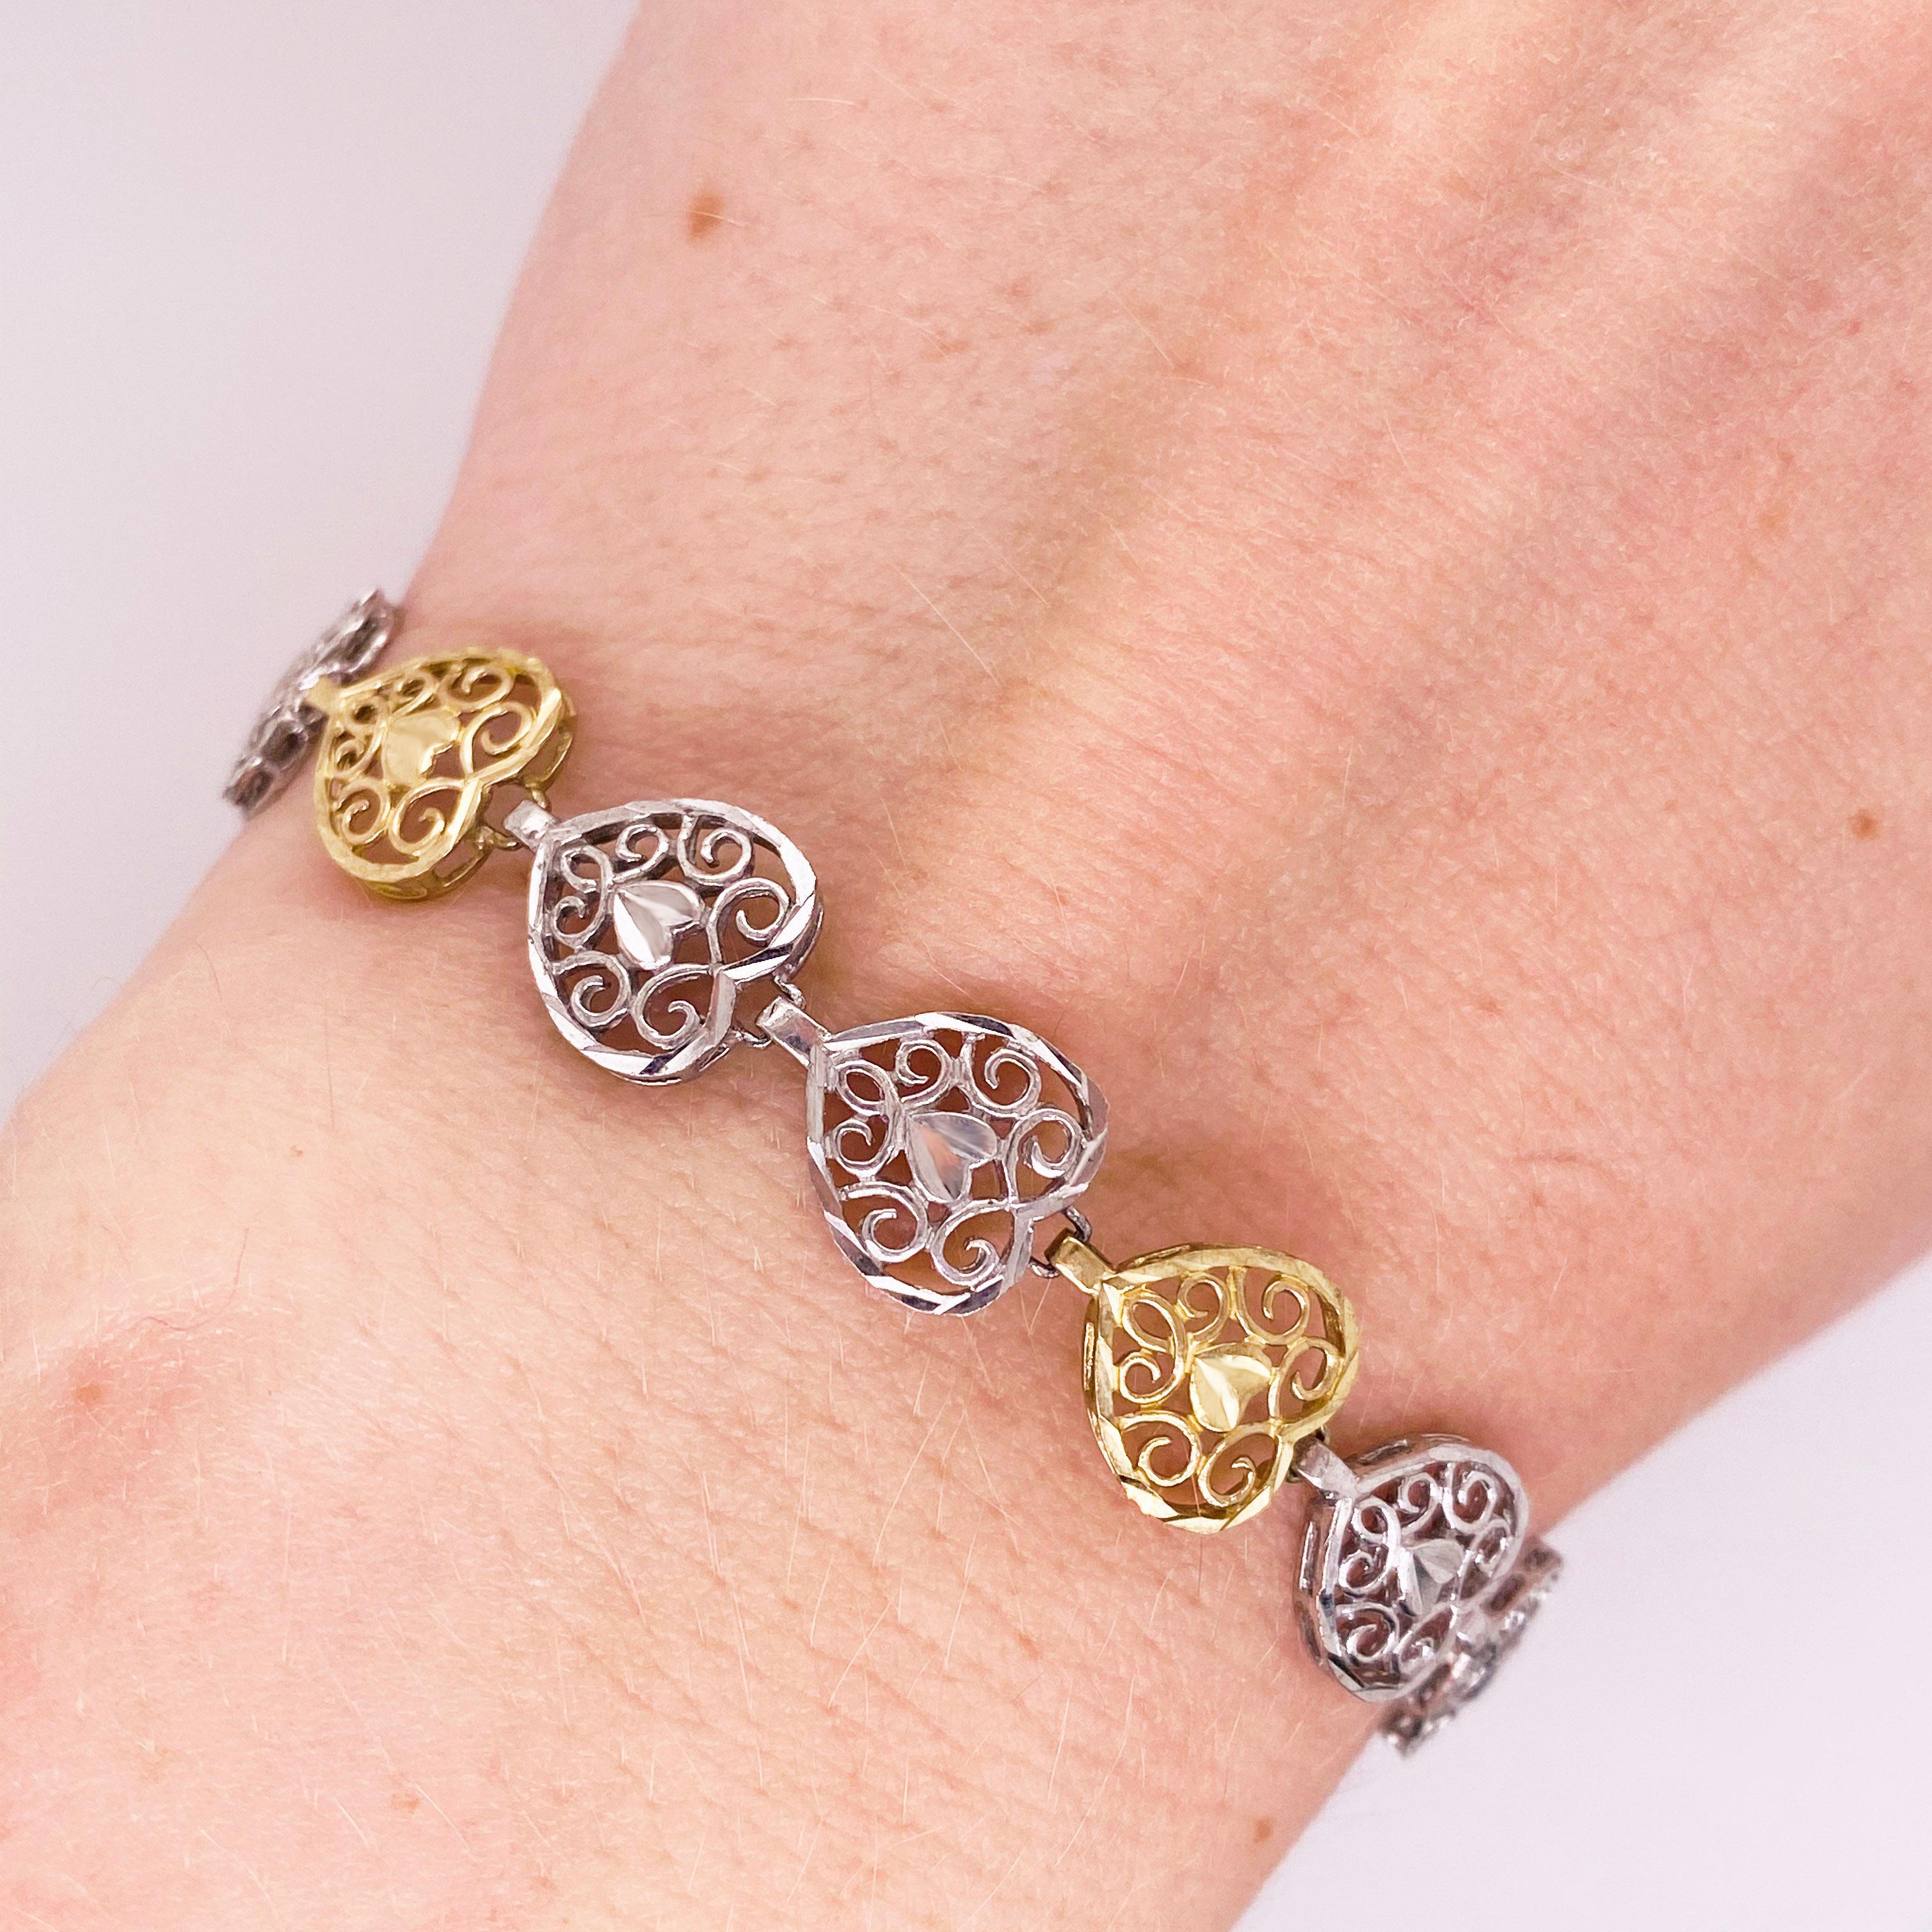 This filigree heart bracelet is so precious with its delicate hearts that are multi=metals.  Every other heart is 10 karat yellow gold and the others are precious sterling silver.  Its closure is a sturdy lobster clasp.   The bracelet is 7.25 inches